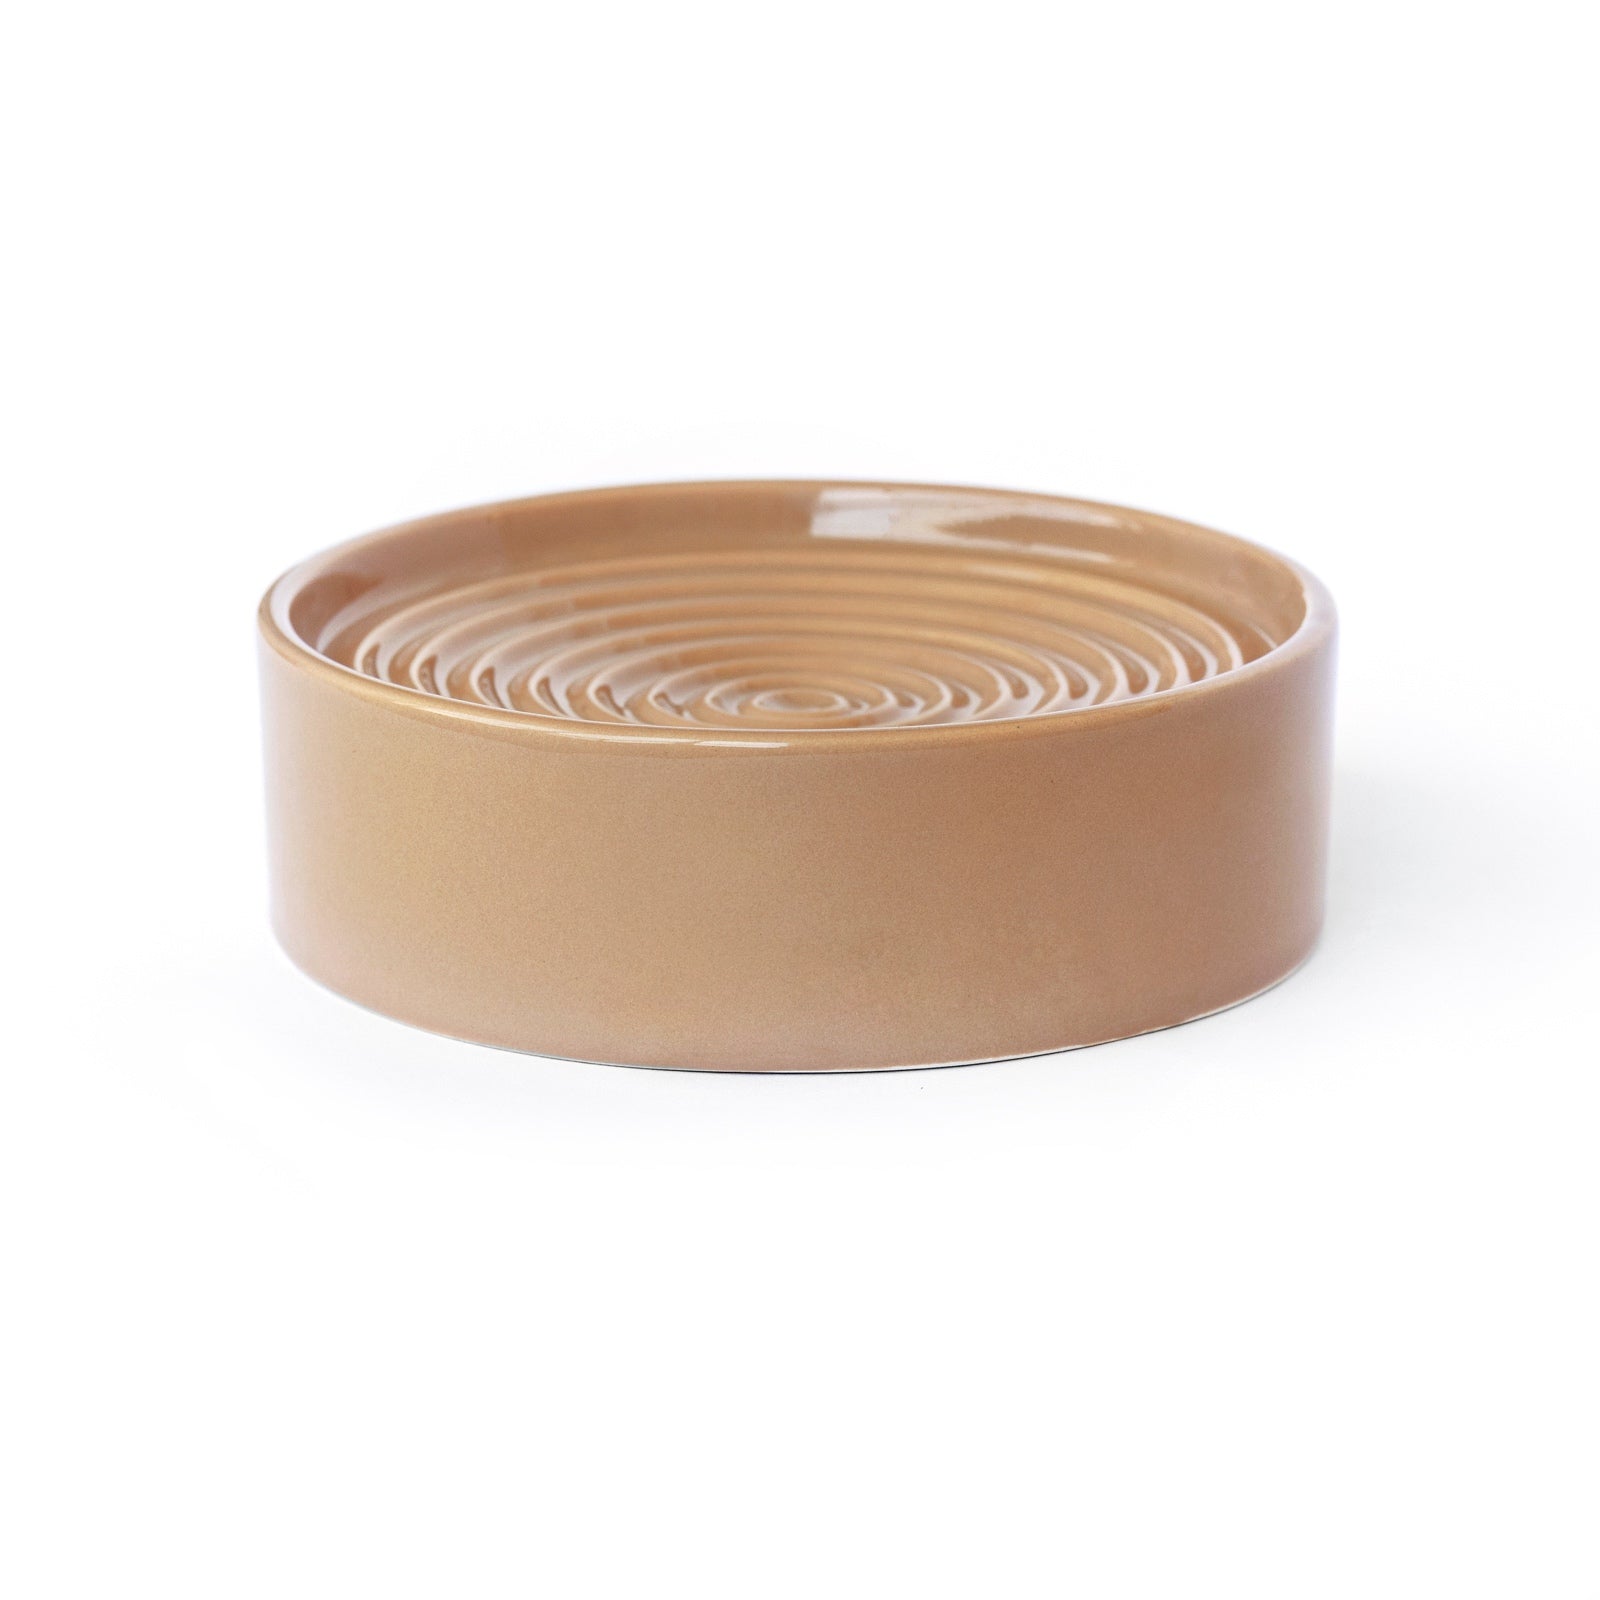 Noots Ceramic Whisker-friendly Slow Feed Cat Bowl